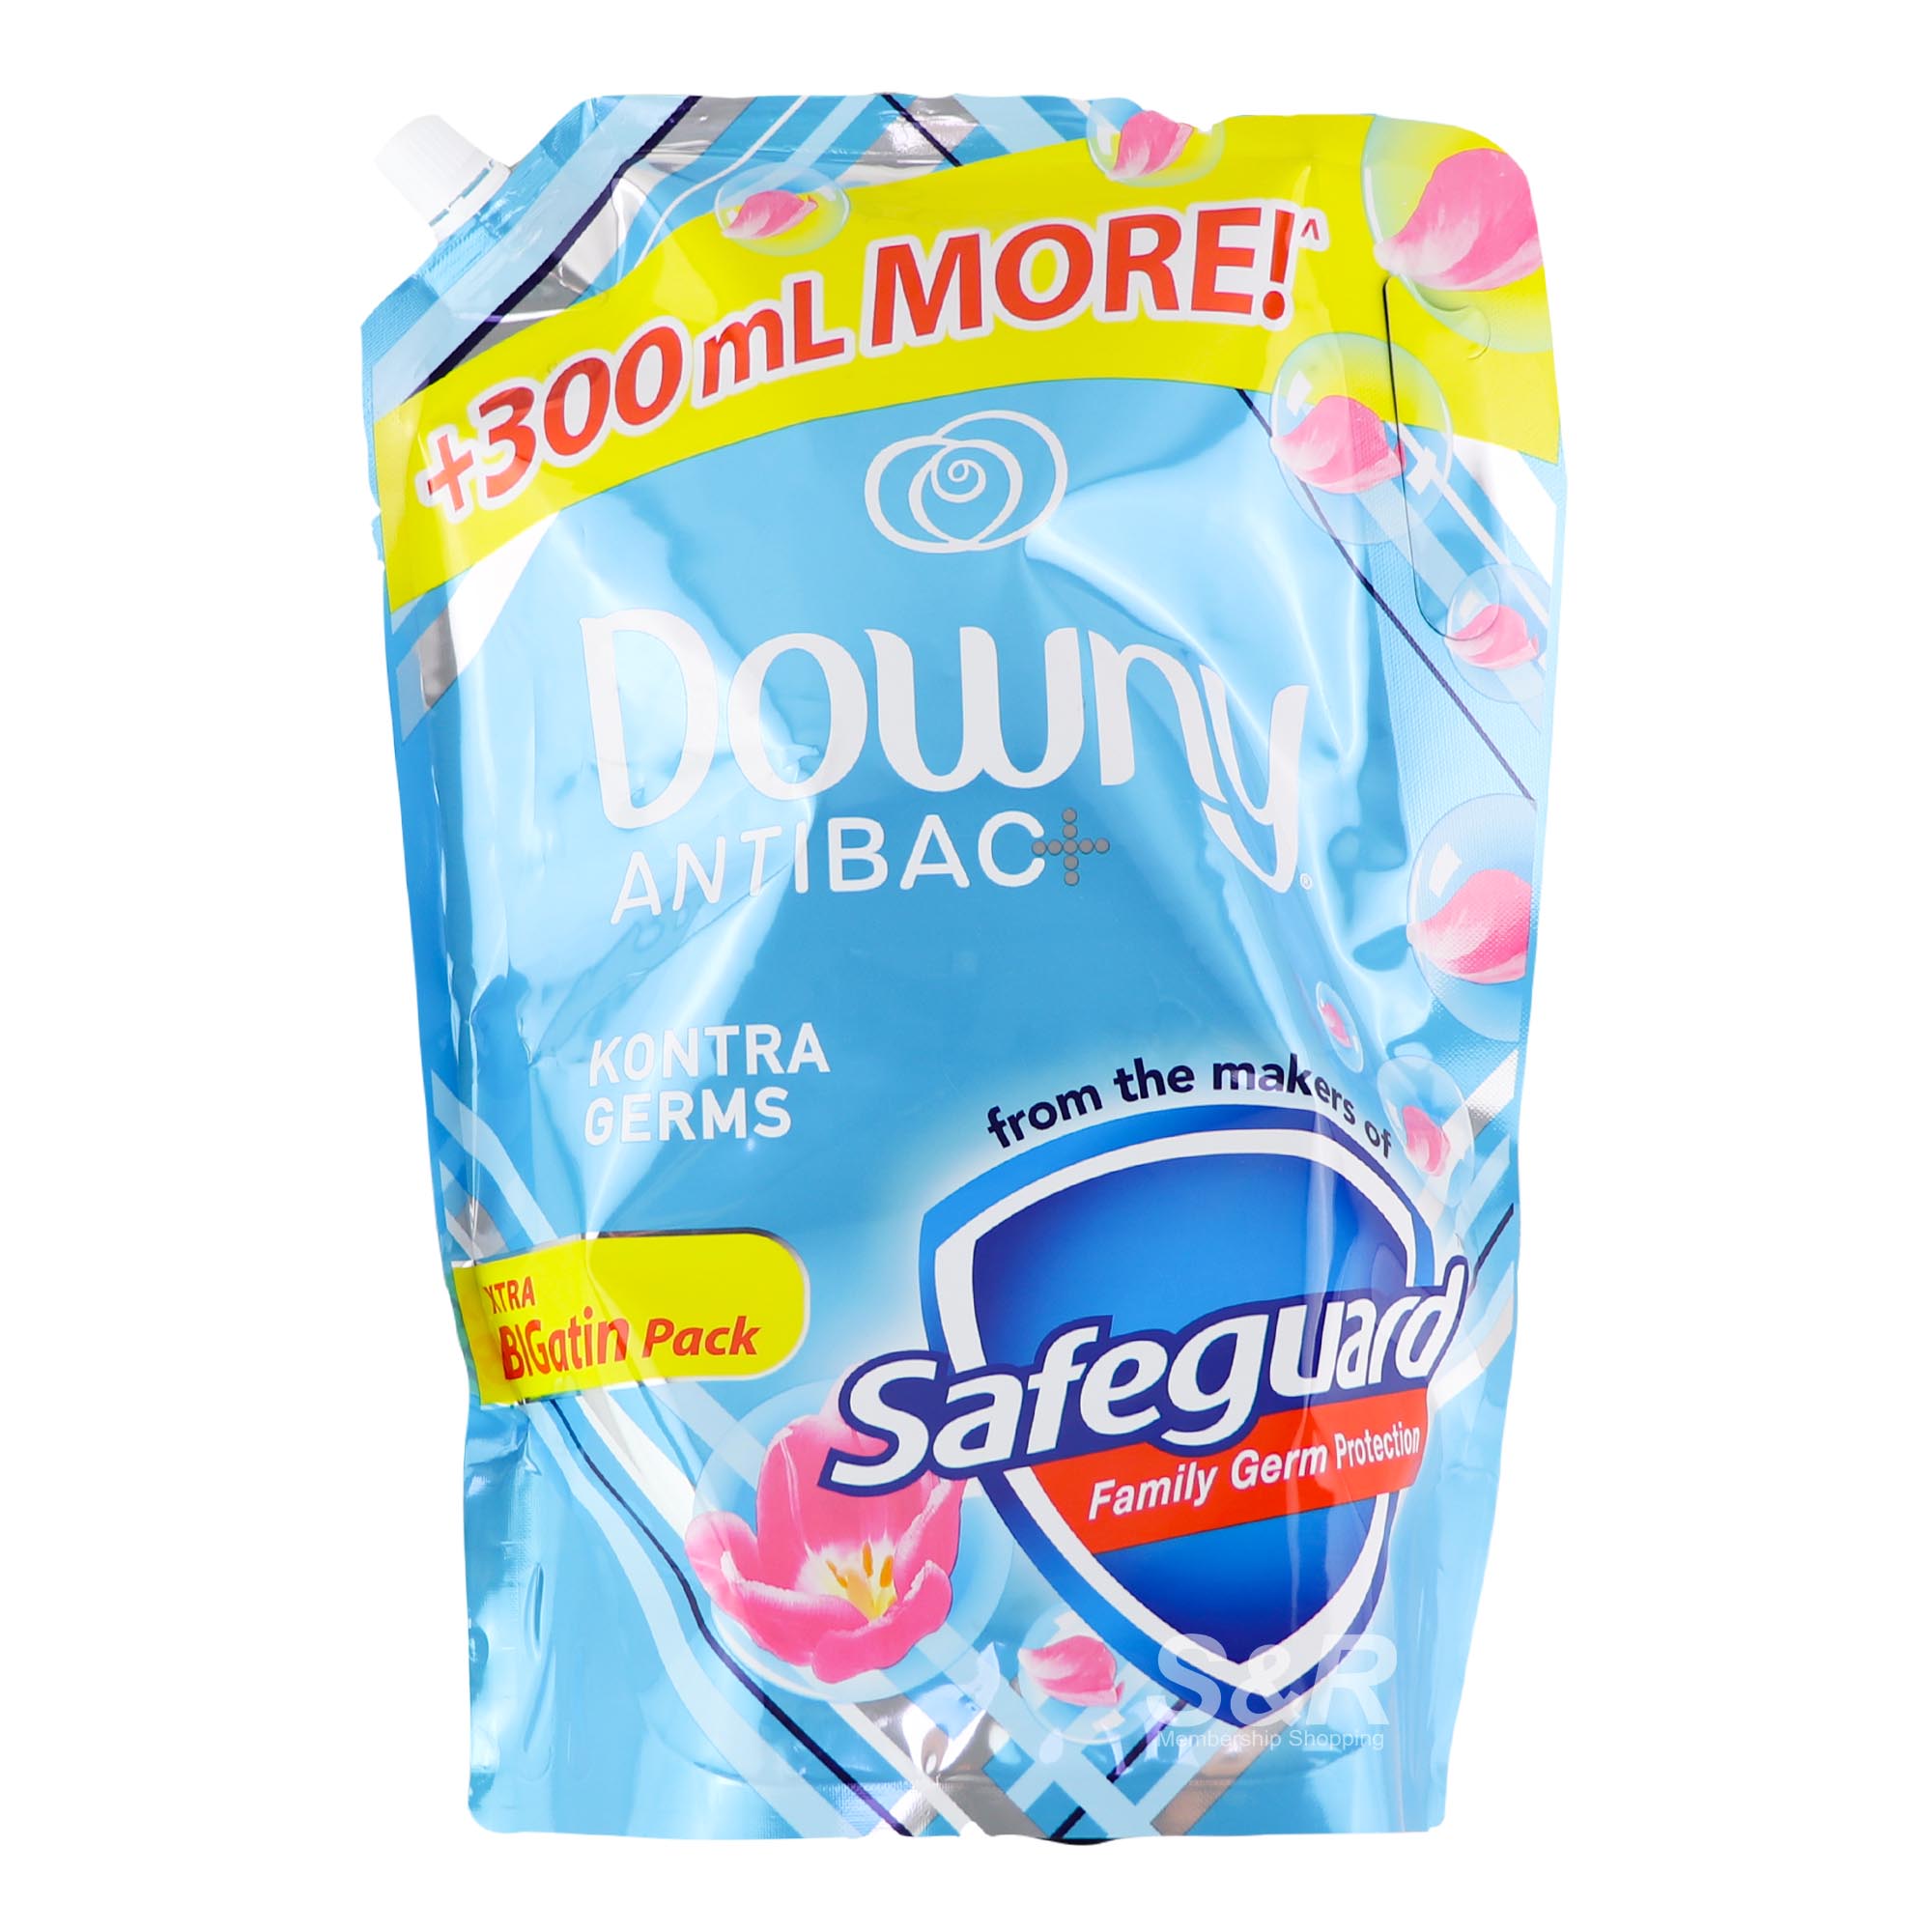 Downy Antibac With Safeguard Fabric Conditioner 2L